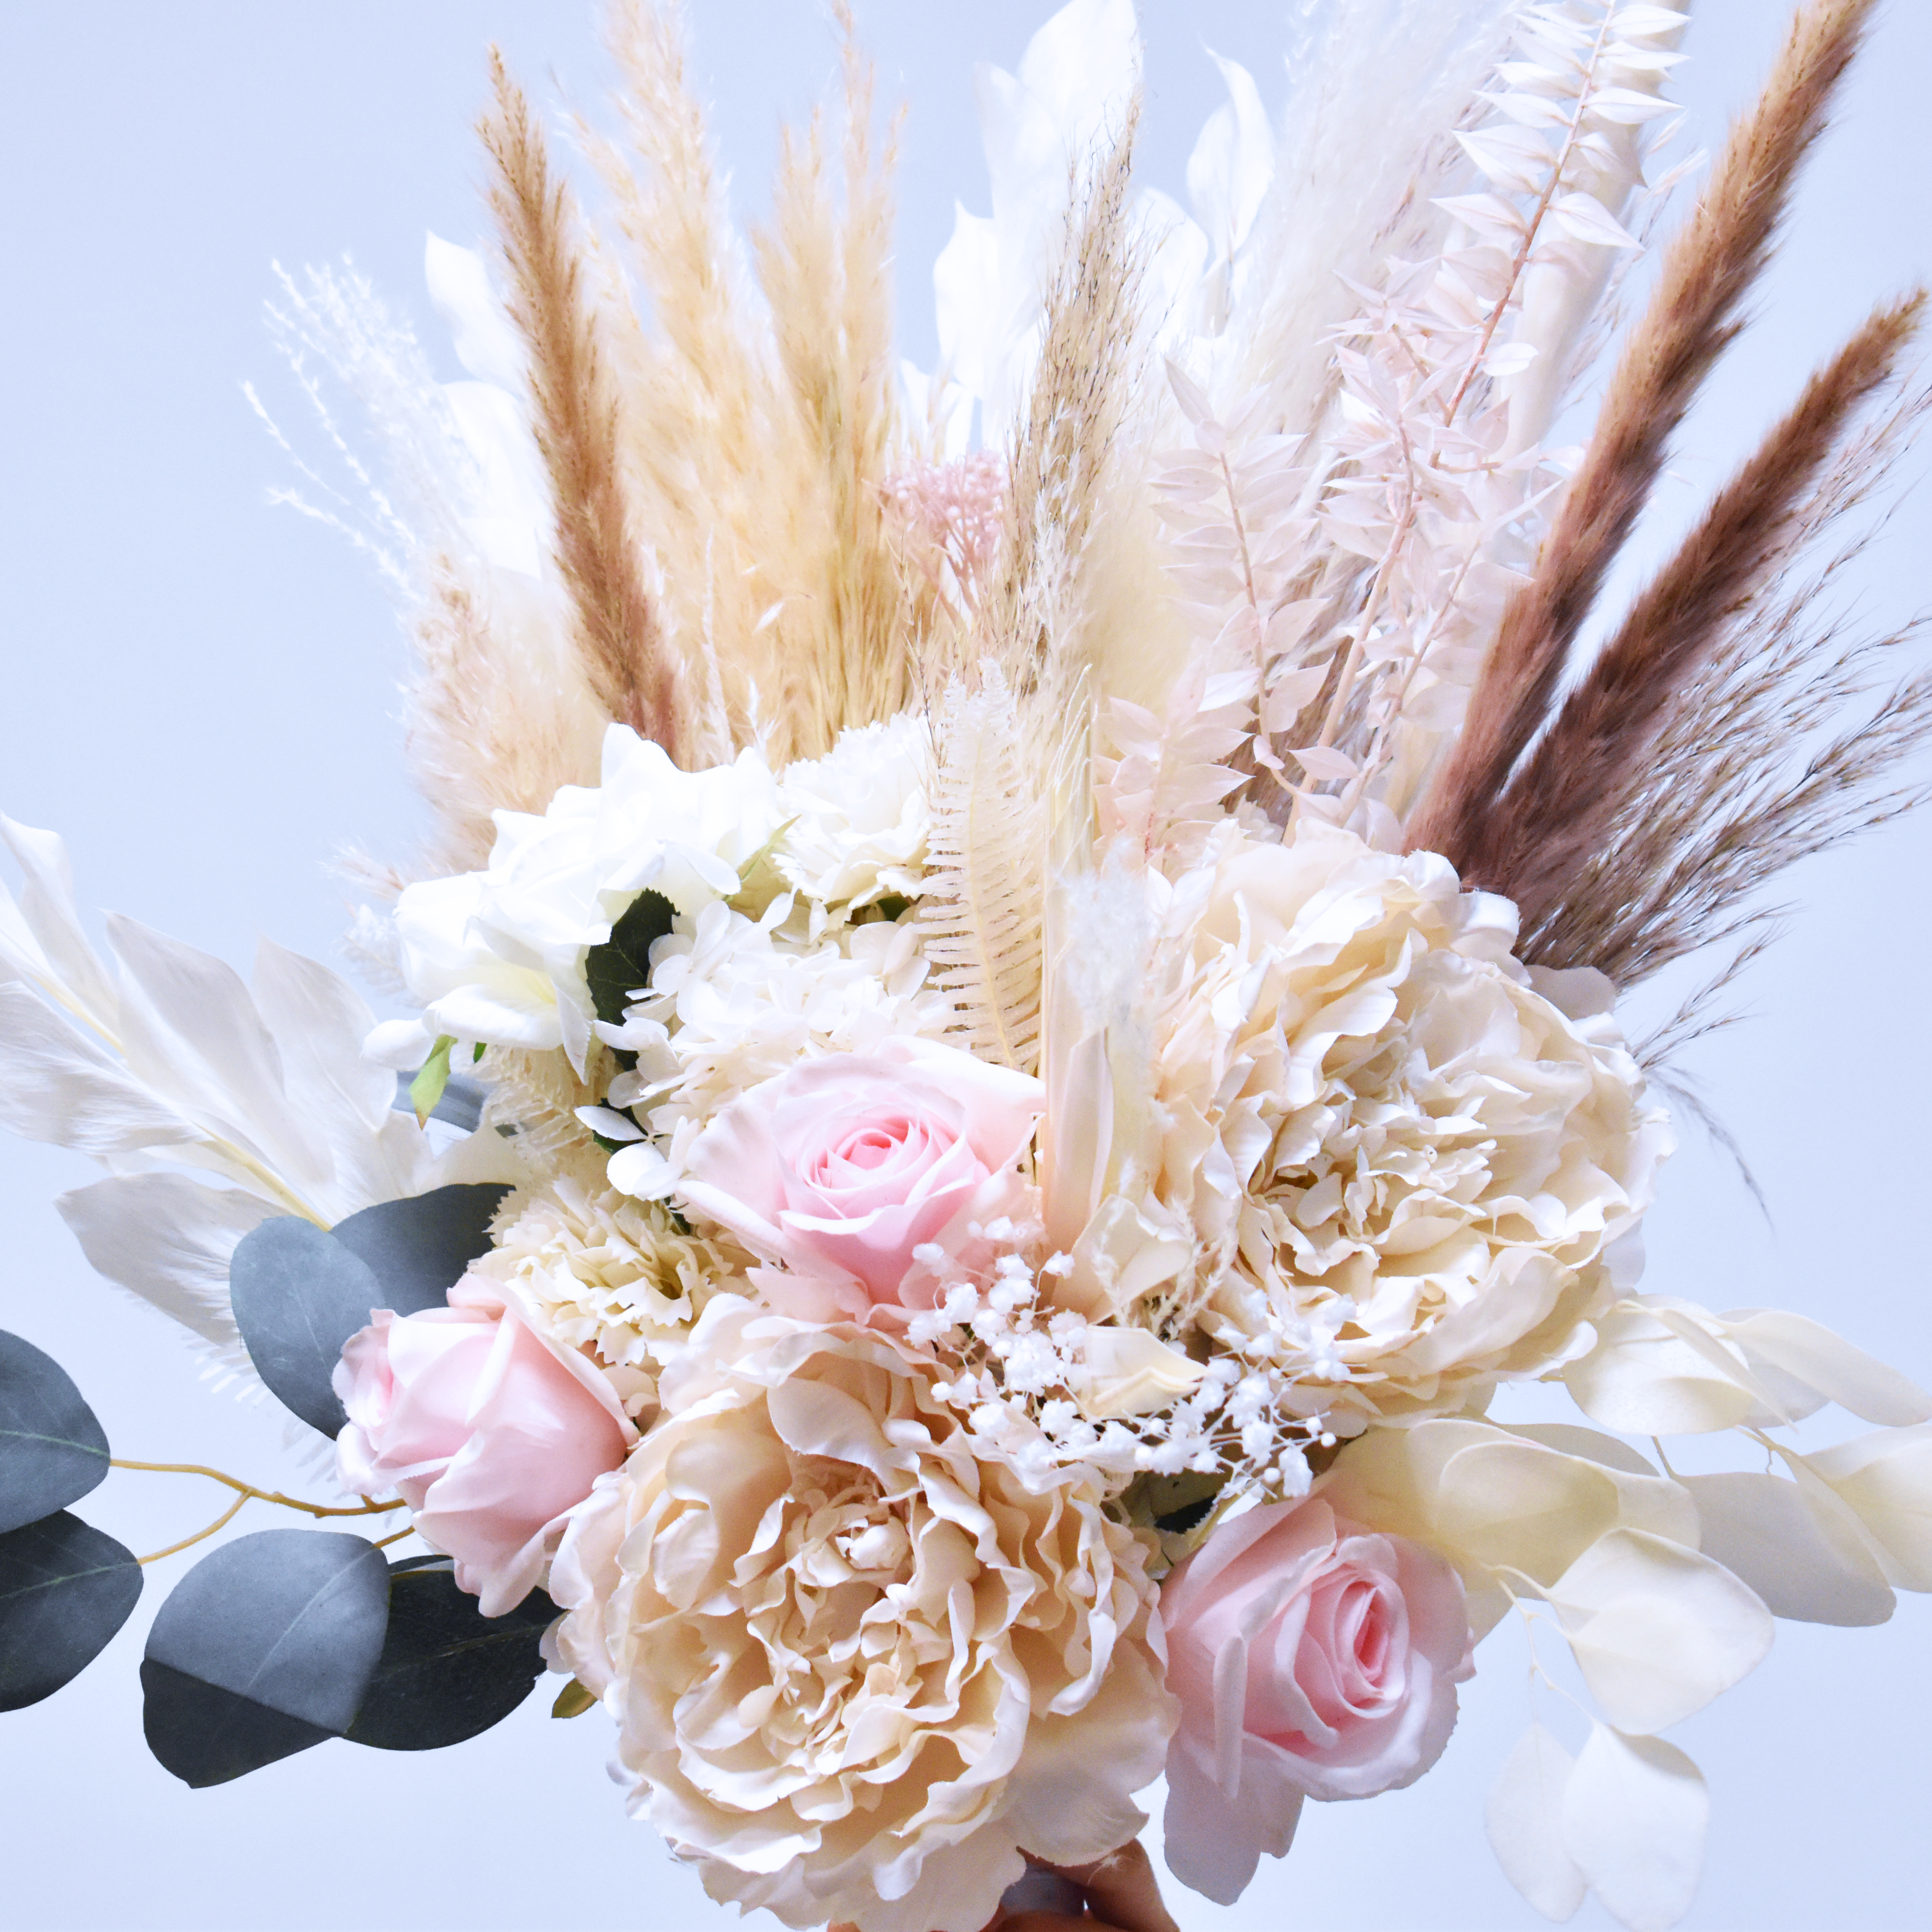 Whimsy Pastures Dried Flowers Bridal Bouquet